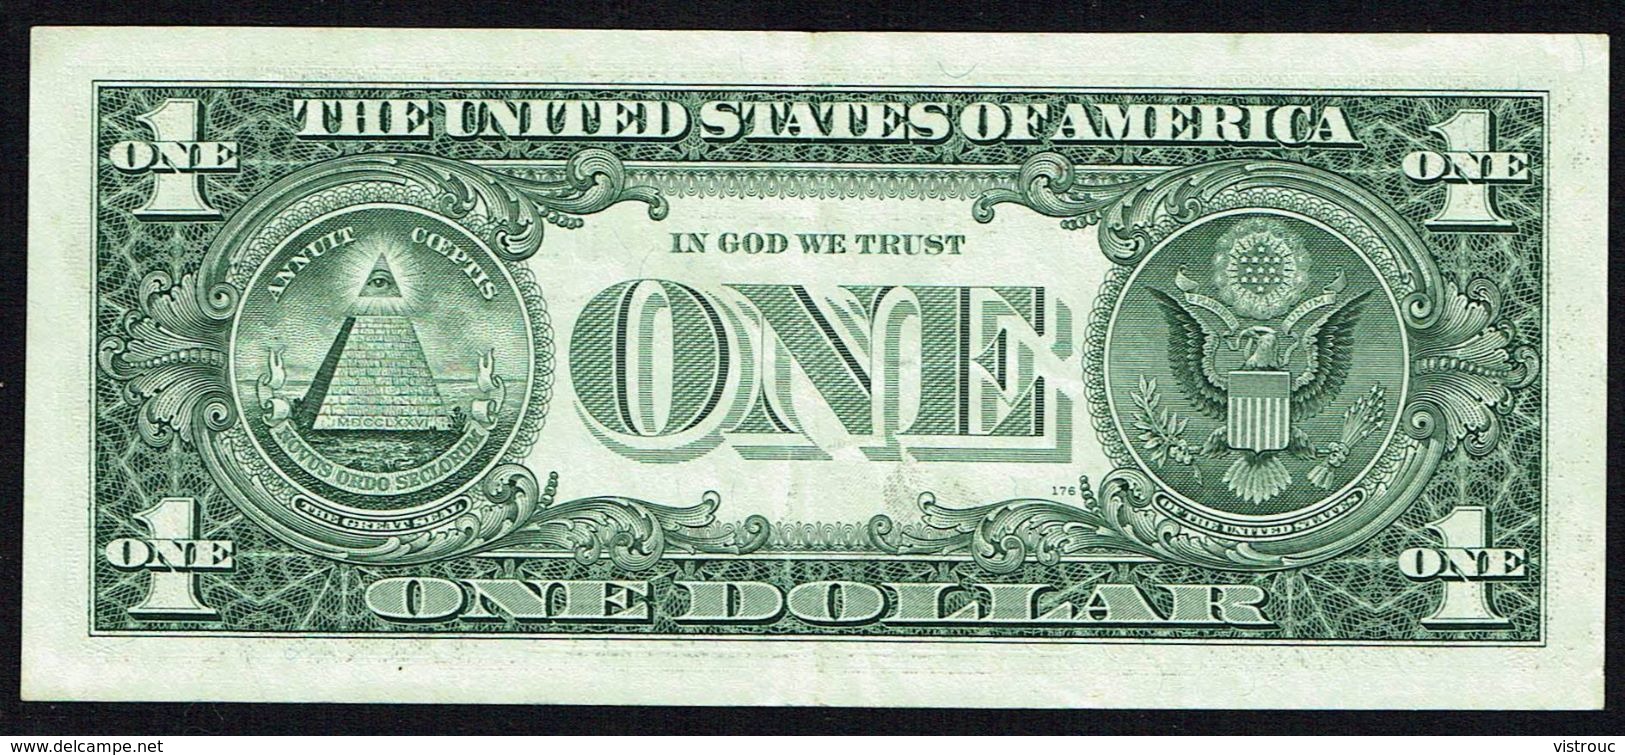 1 US DOLLAR - Series 2006 - N° D 117893325 B - C 165 - USED. - Federal Reserve Notes (1928-...)